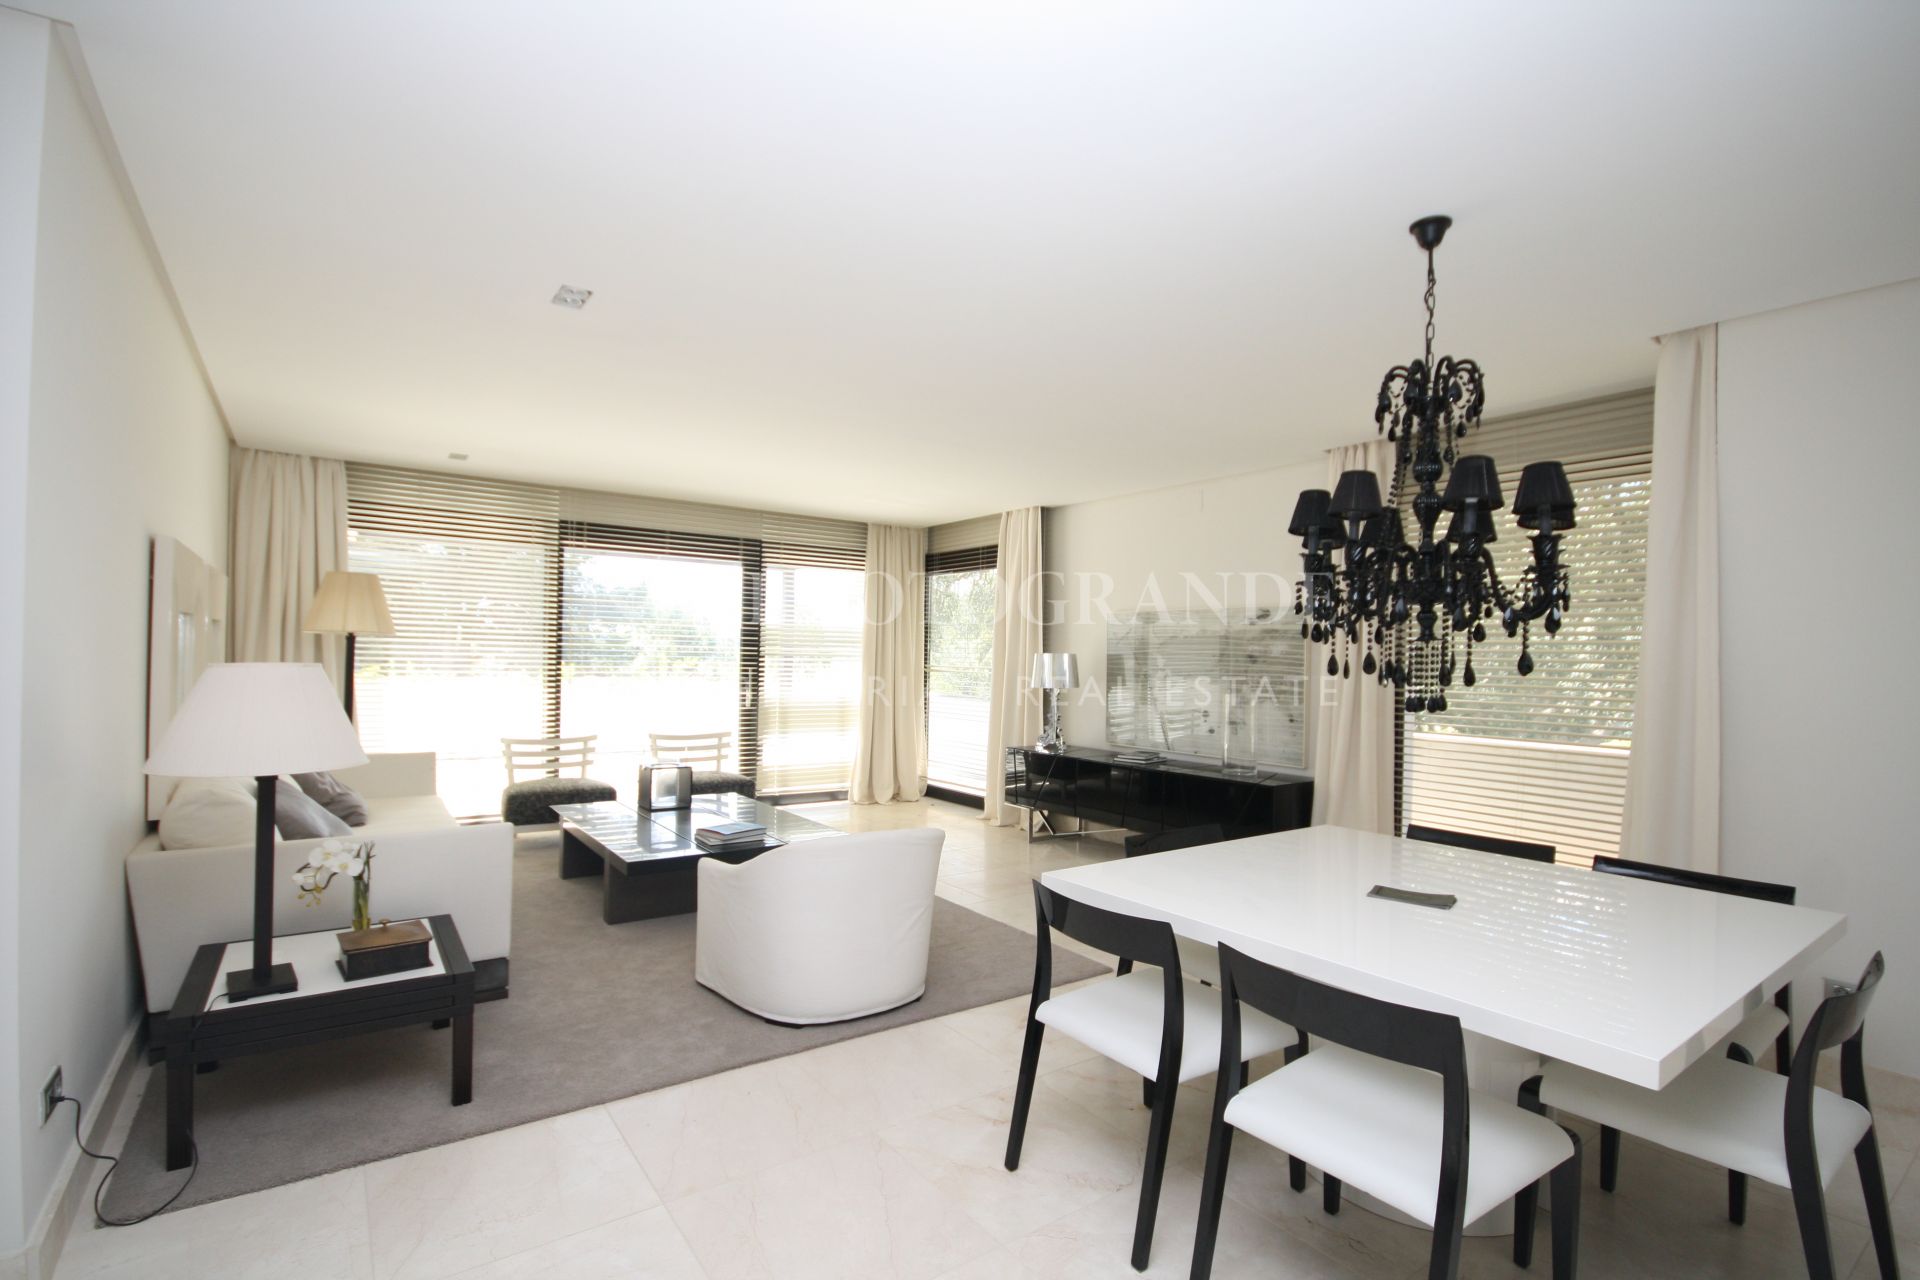 Contemporary large apartment in small community next to Valderrama Golf Club